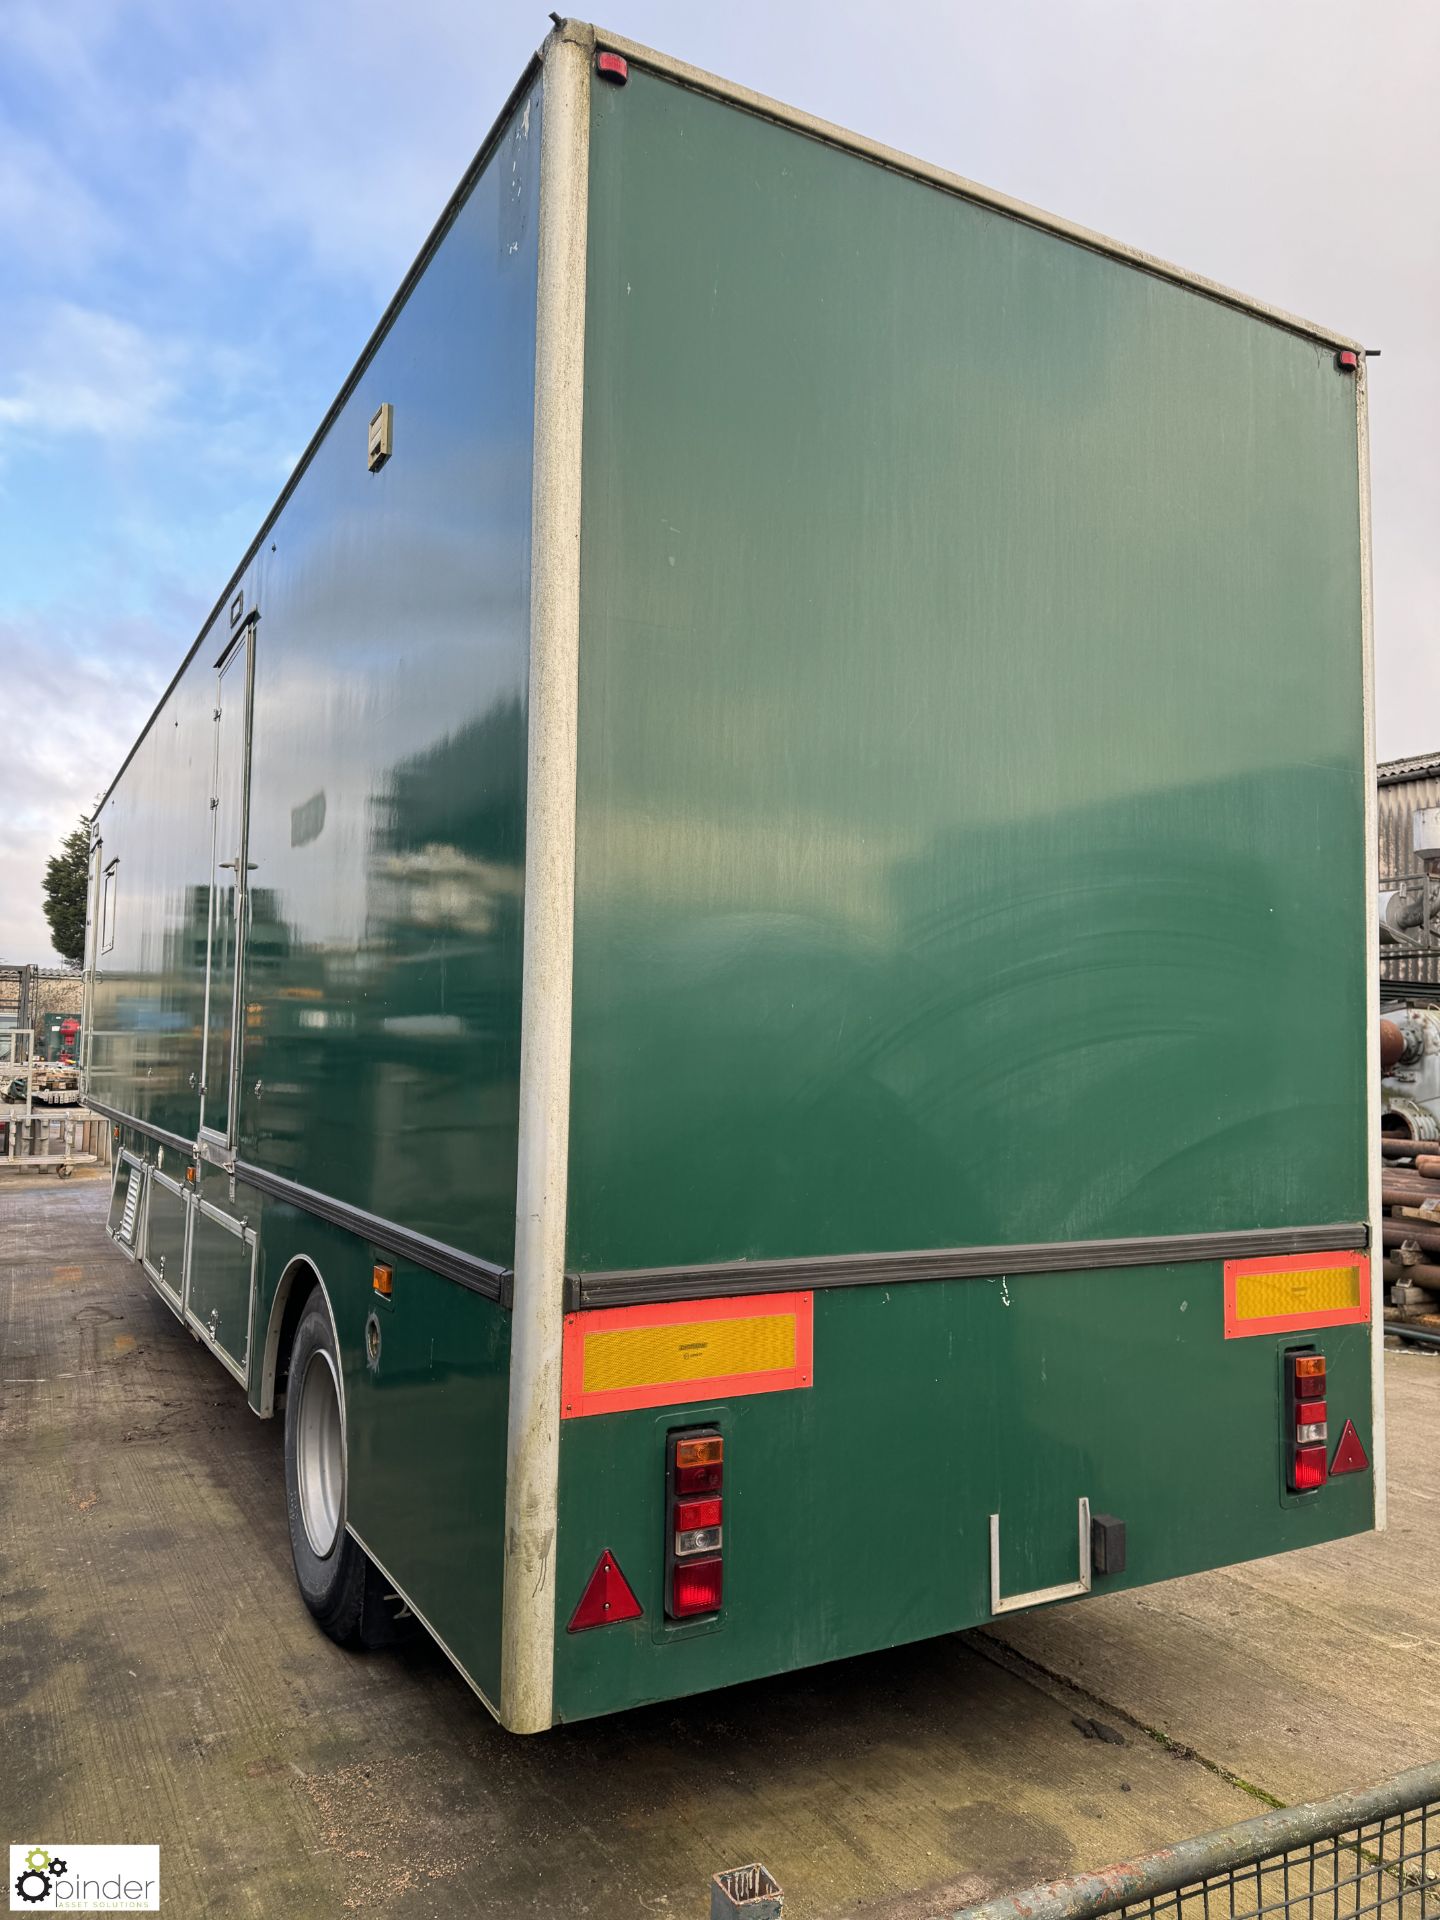 Trailer type Accommodation Unit, comprising office 3000mm x 2450mm, with window door, plug points, - Image 6 of 33